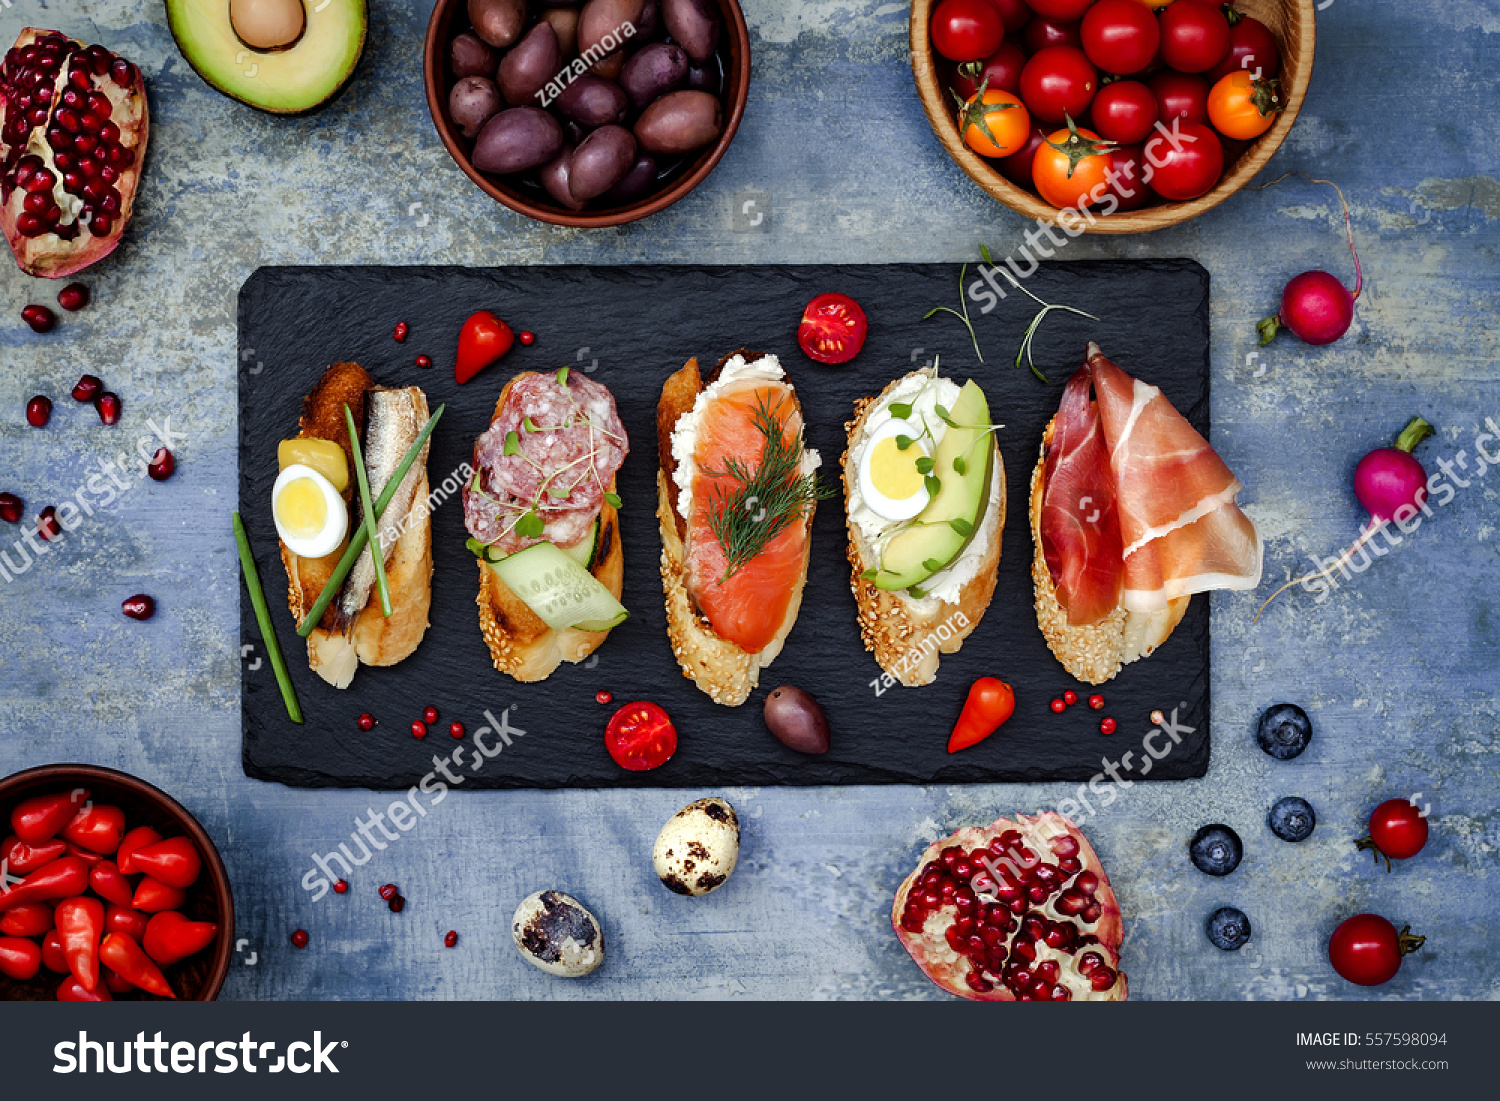 Mini sandwiches food set. Brushetta or authentic traditional spanish tapas for lunch table. Delicious snack, appetizer, antipasti on party or picnic time. Top view. #557598094